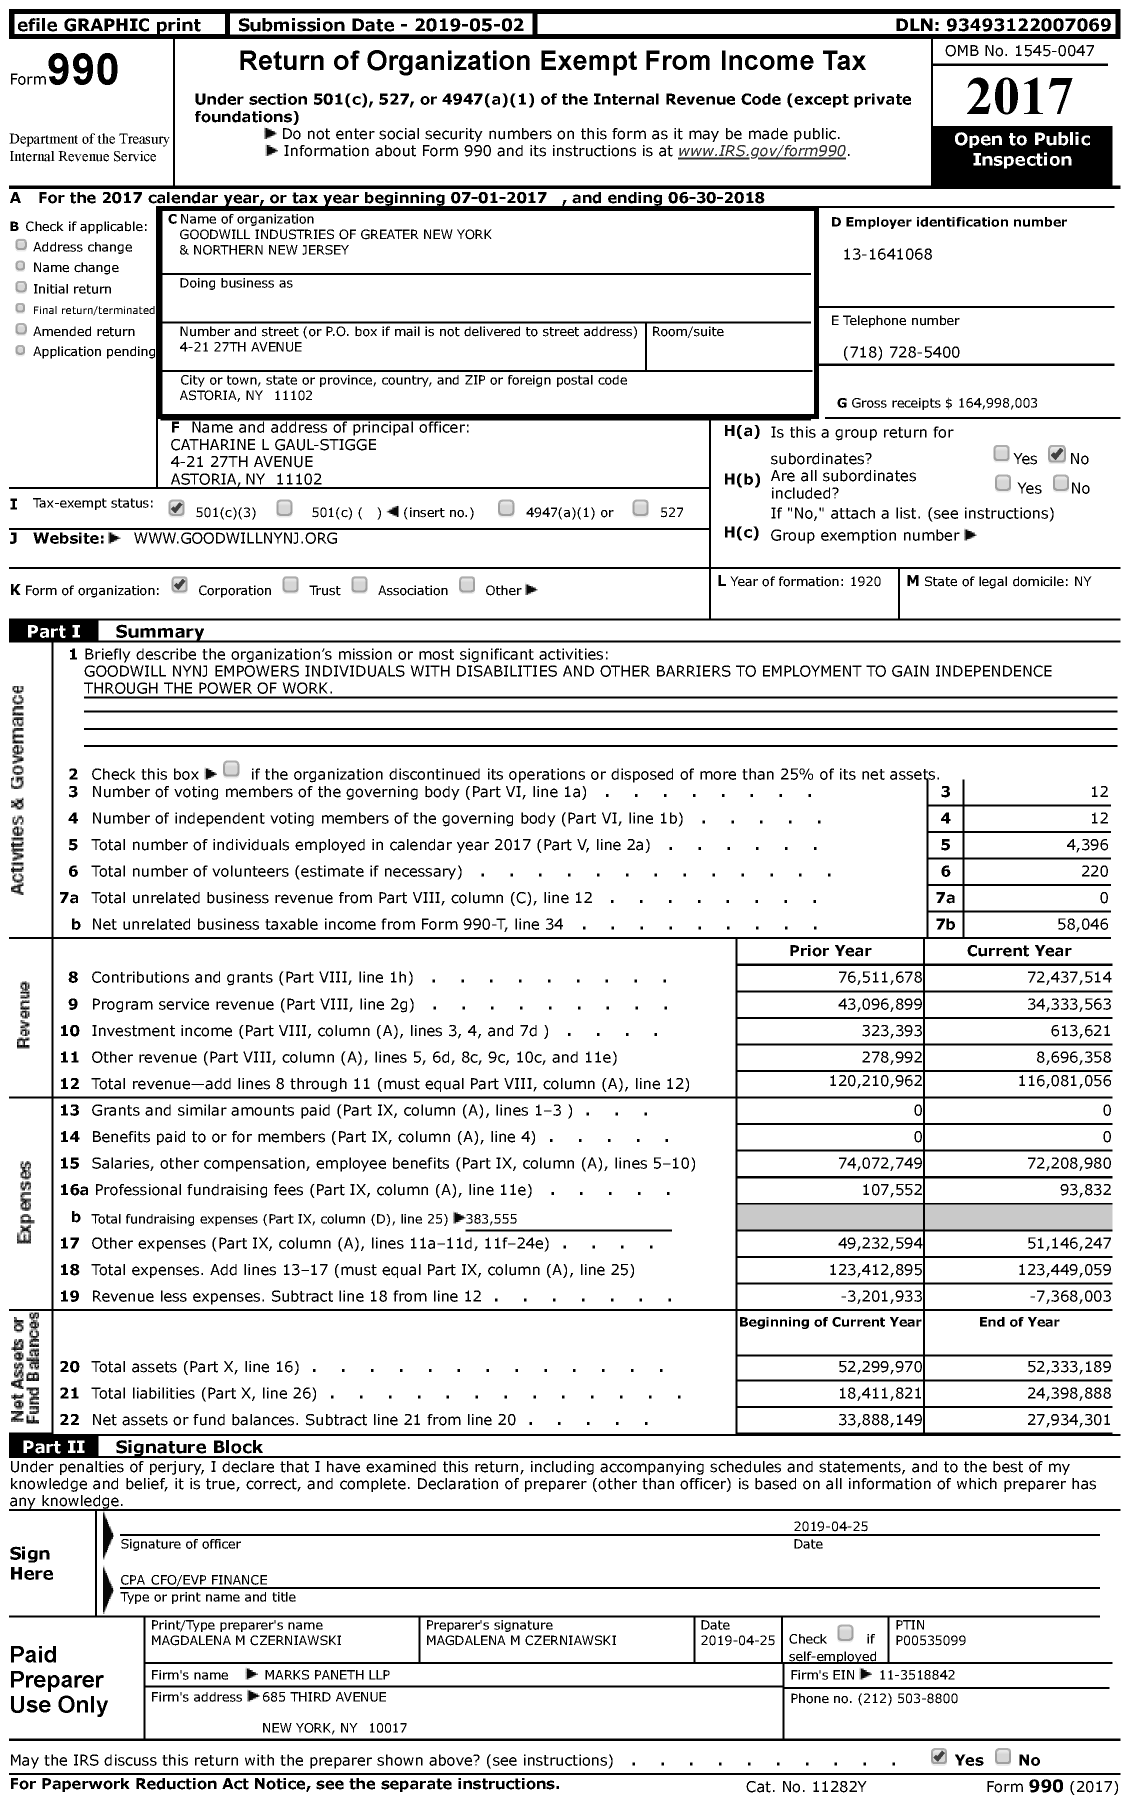 Image of first page of 2017 Form 990 for Goodwill Industries of Greater New York and Northern New Jersey